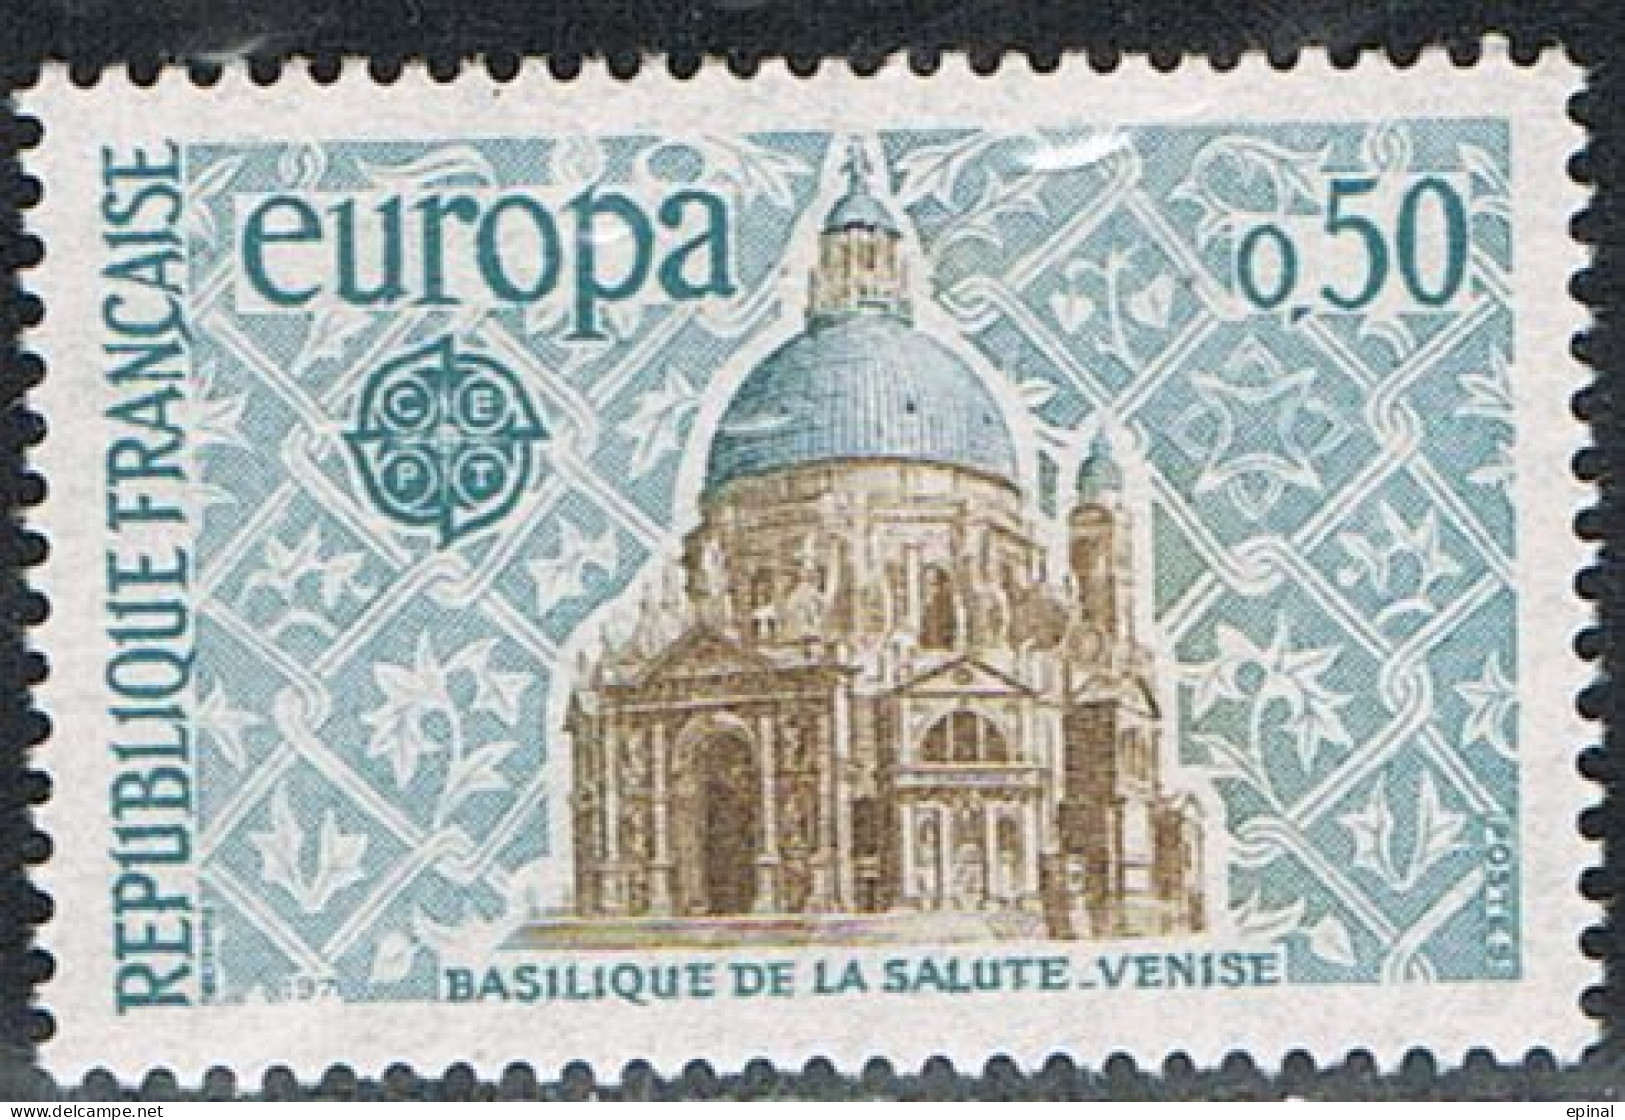 FRANCE : N° 1676 ** (Europa) - PRIX FIXE - - Unused Stamps